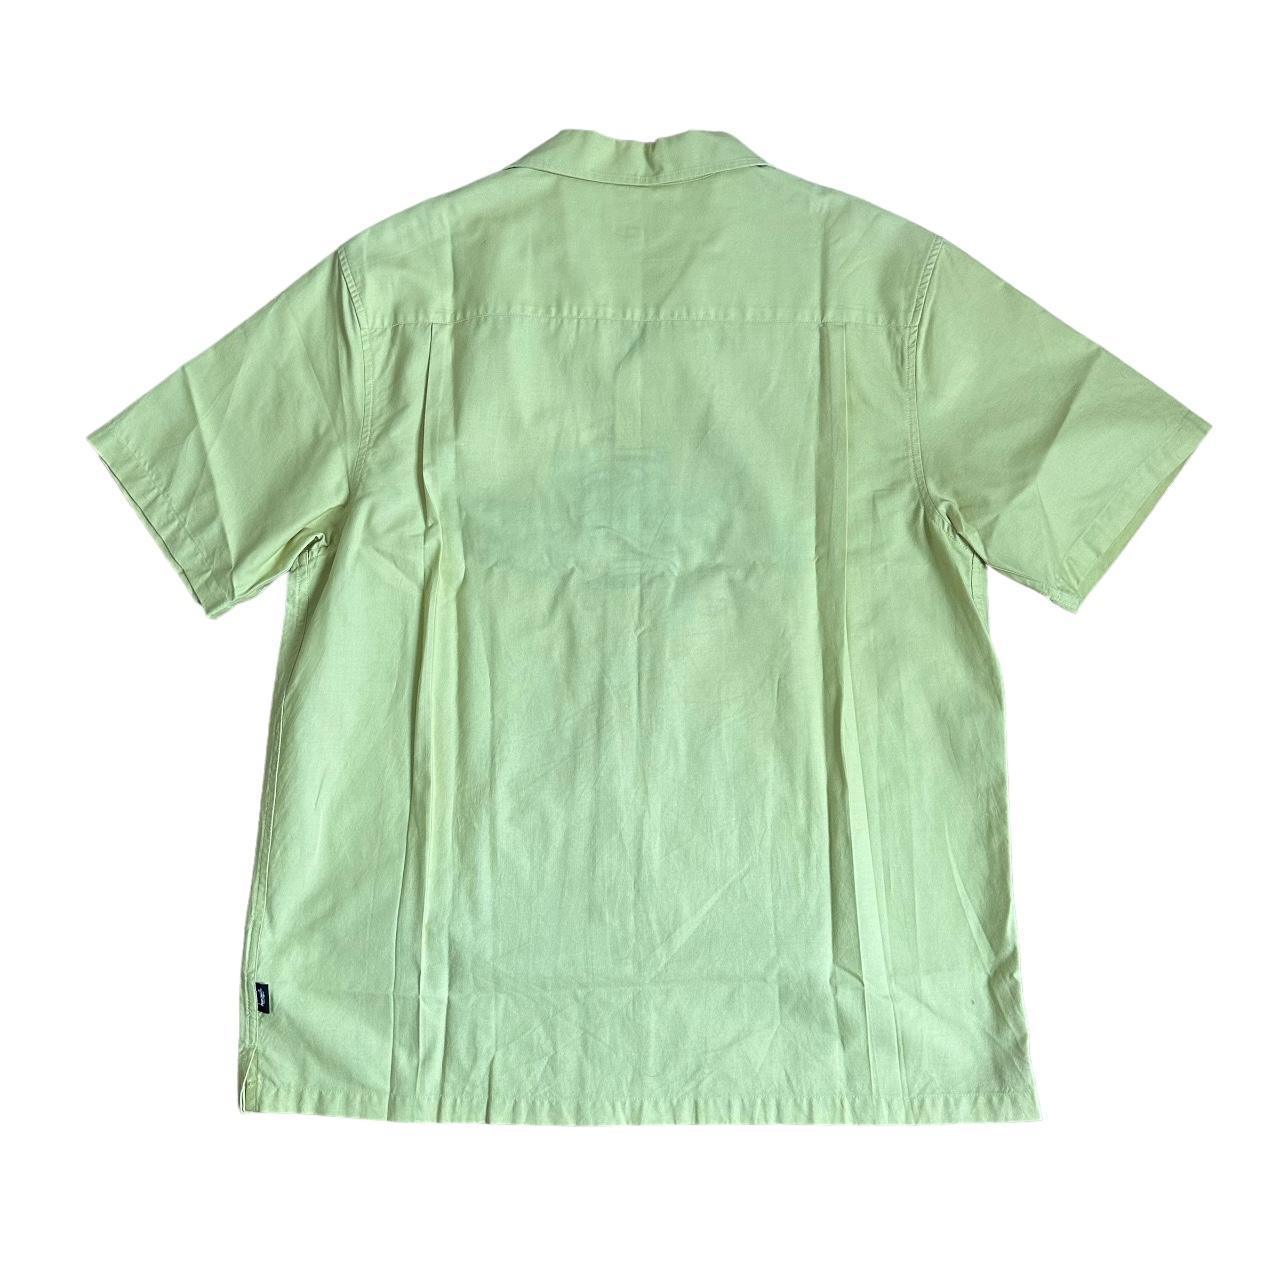 Stussy Button Up auto Yellow Shirt - Known Source